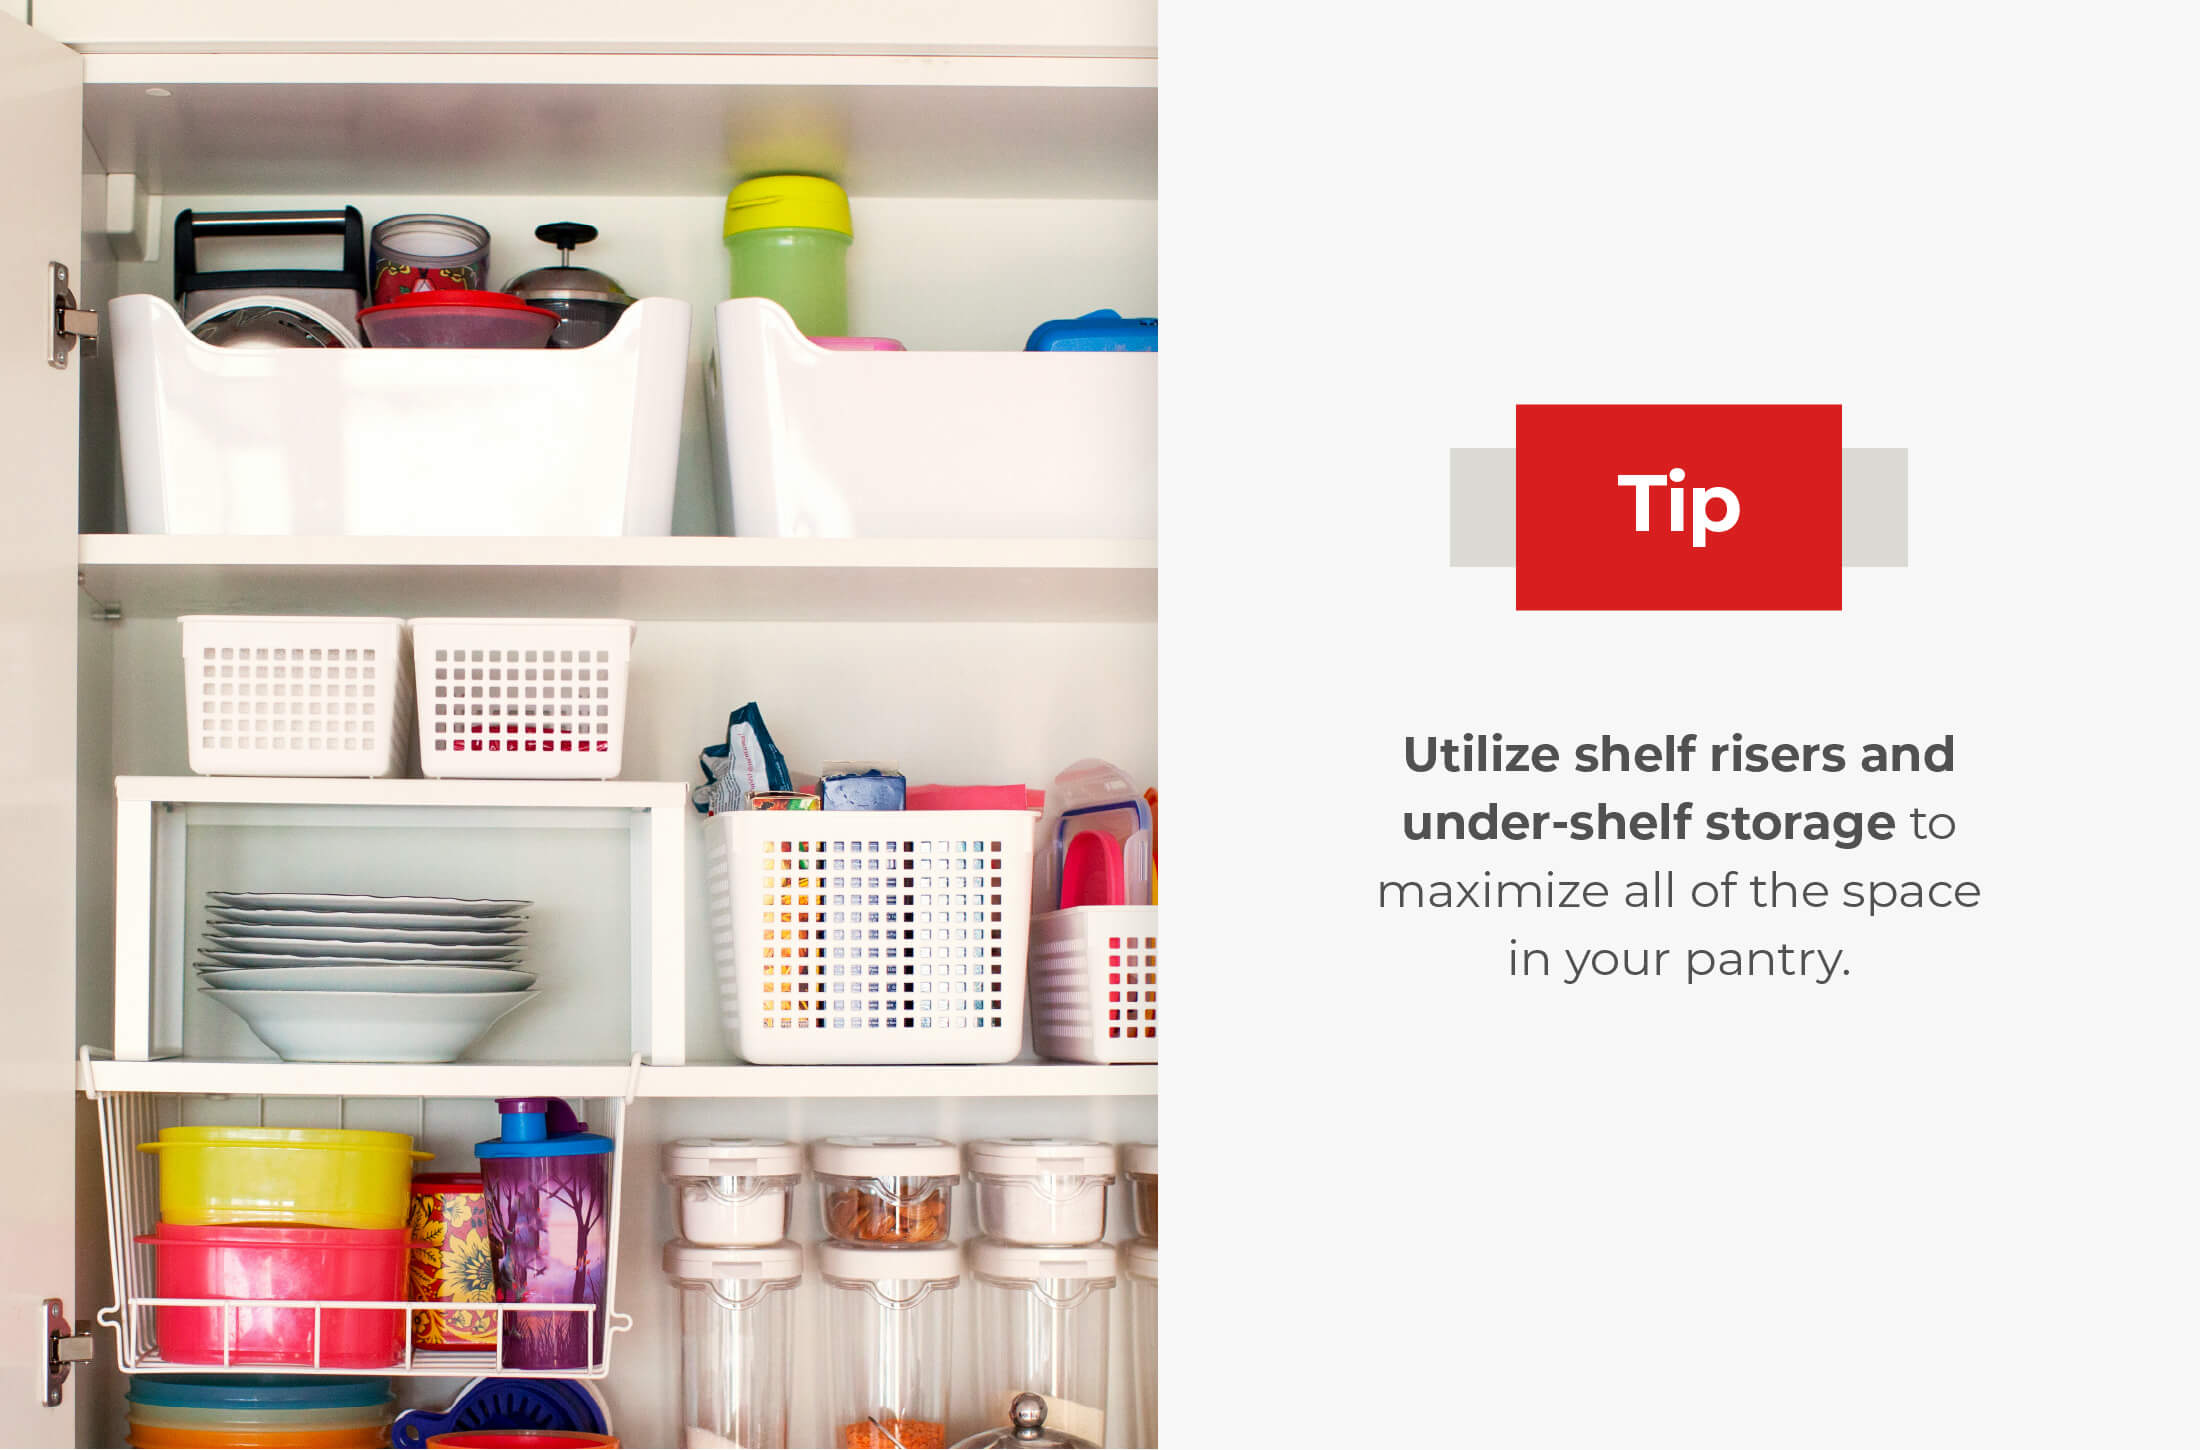 Shelf risers and under-shelf storage help you use all the possible space in your pantry.